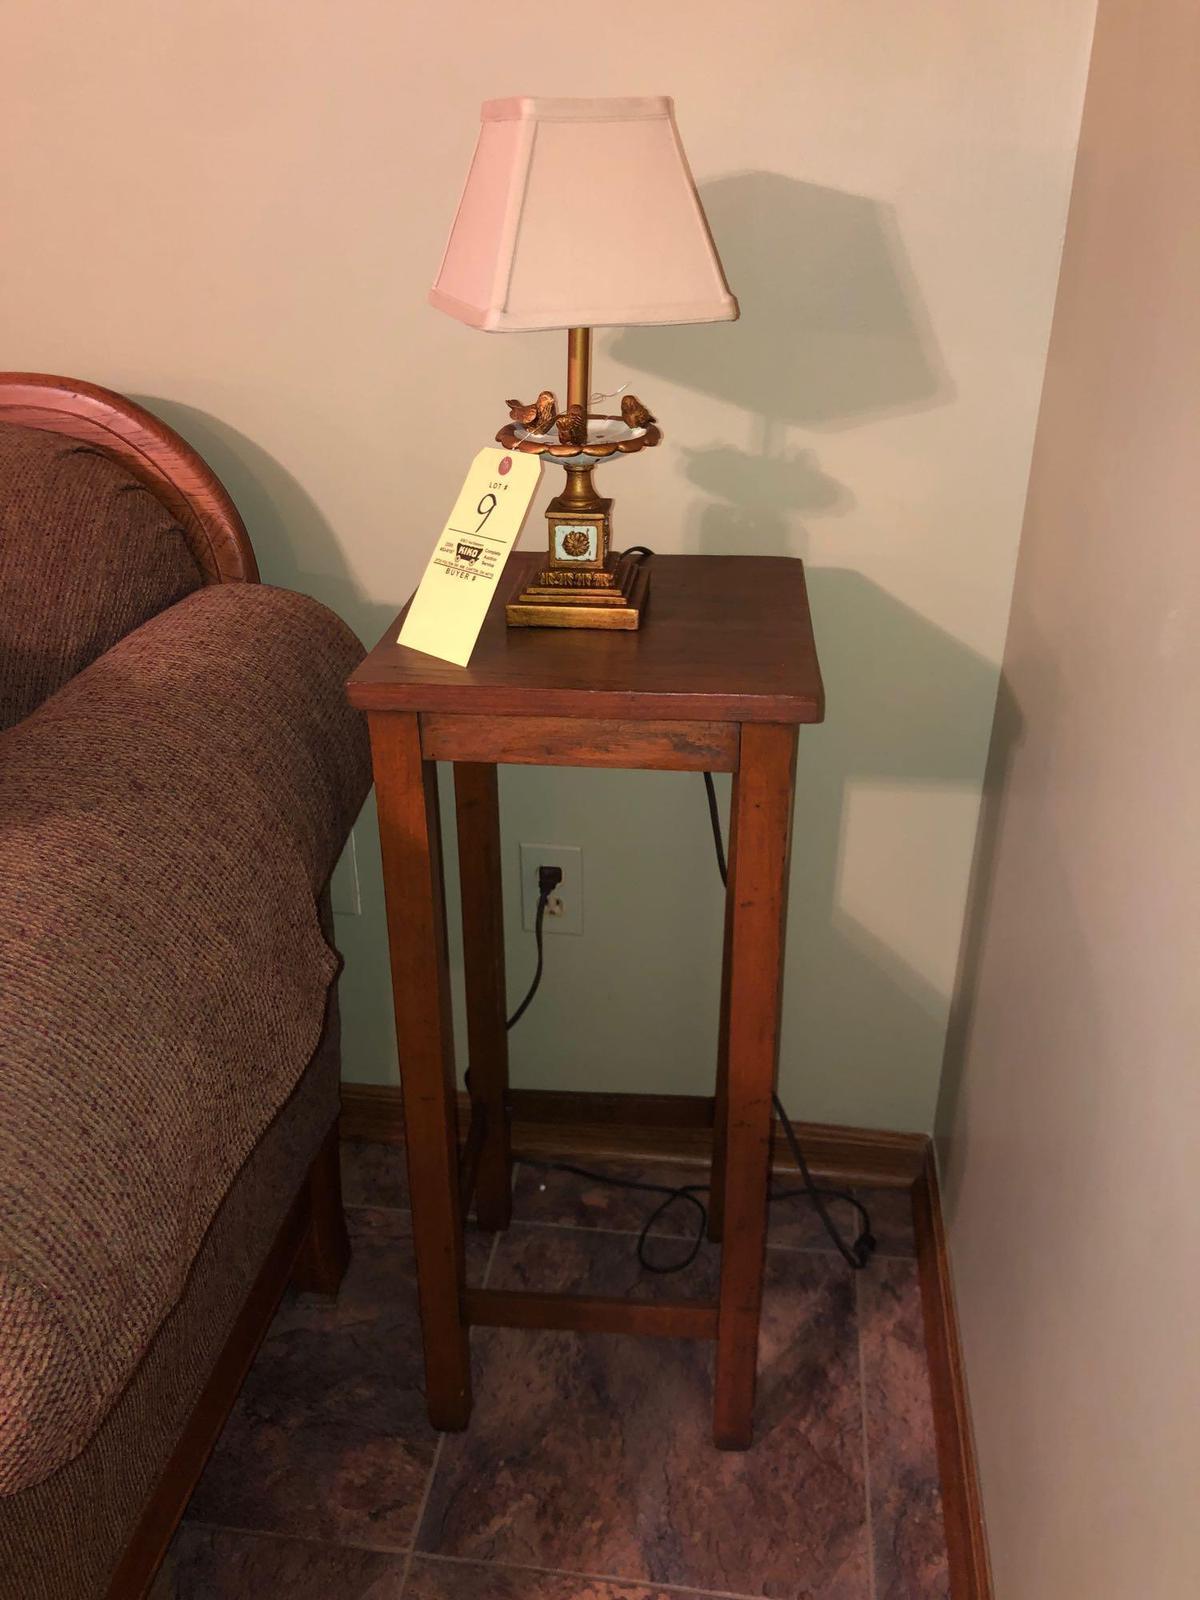 Lamp table and lamp